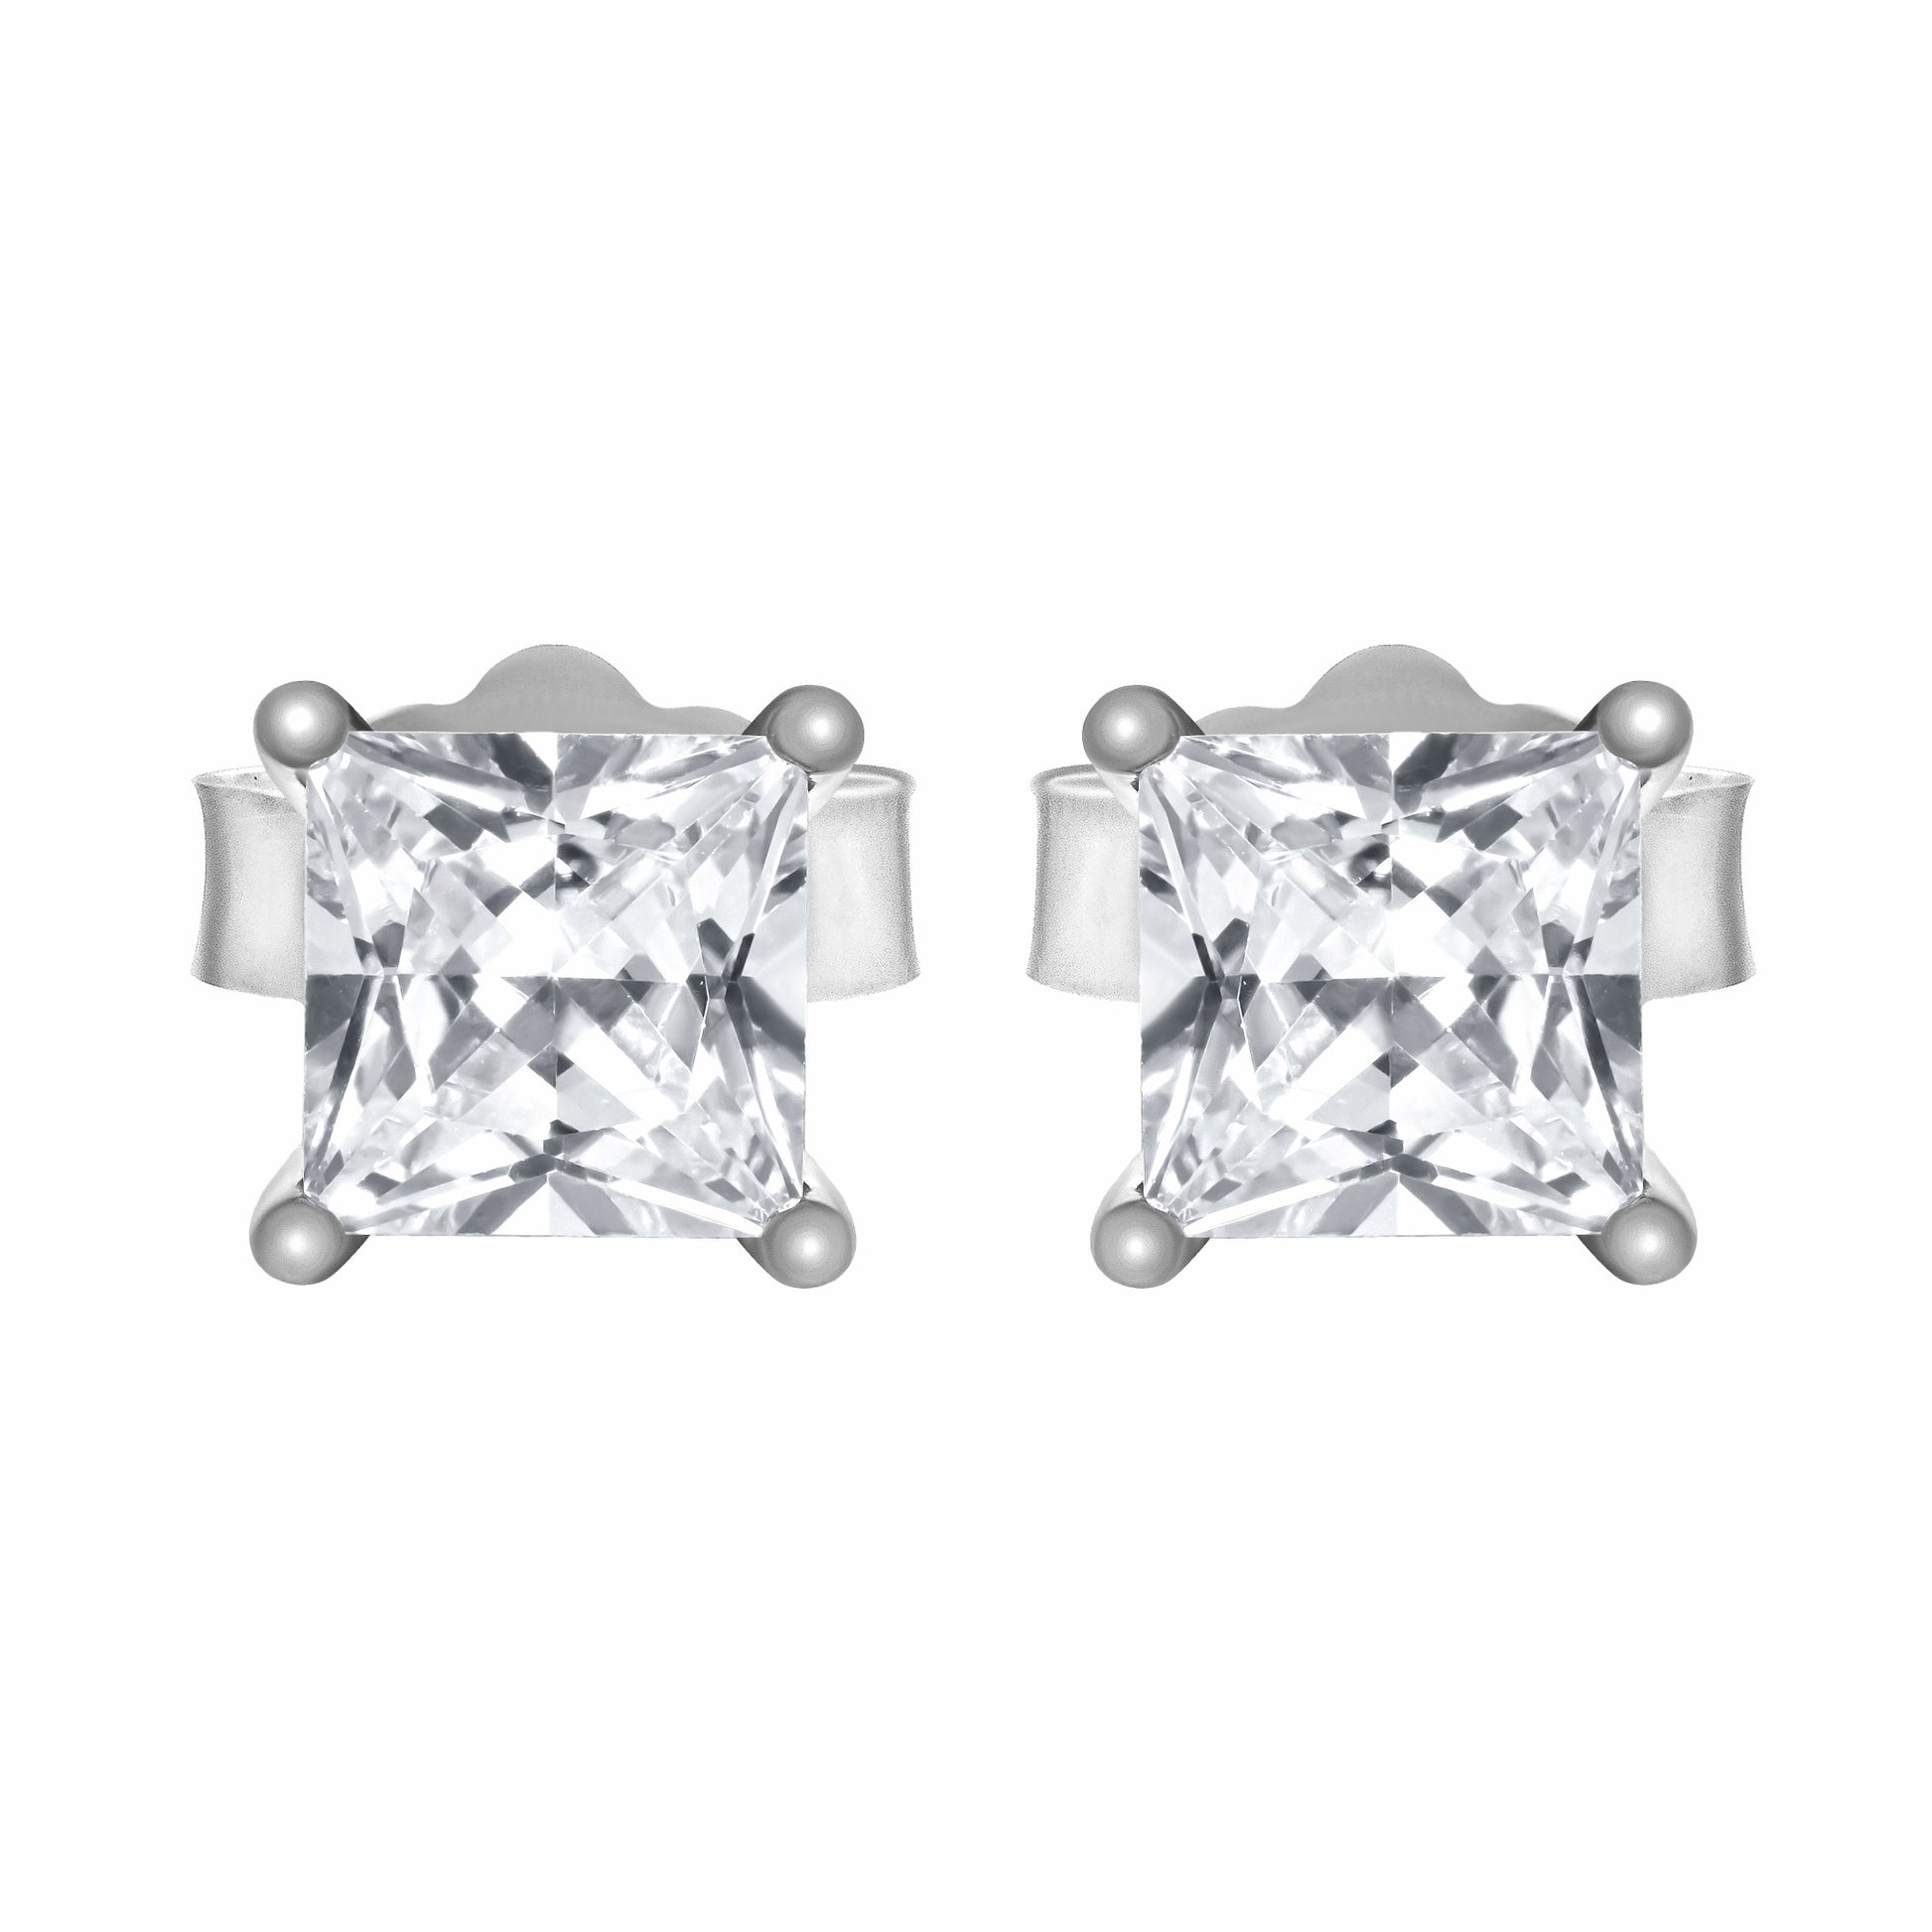 Princess Cut Silver Earrings on white background